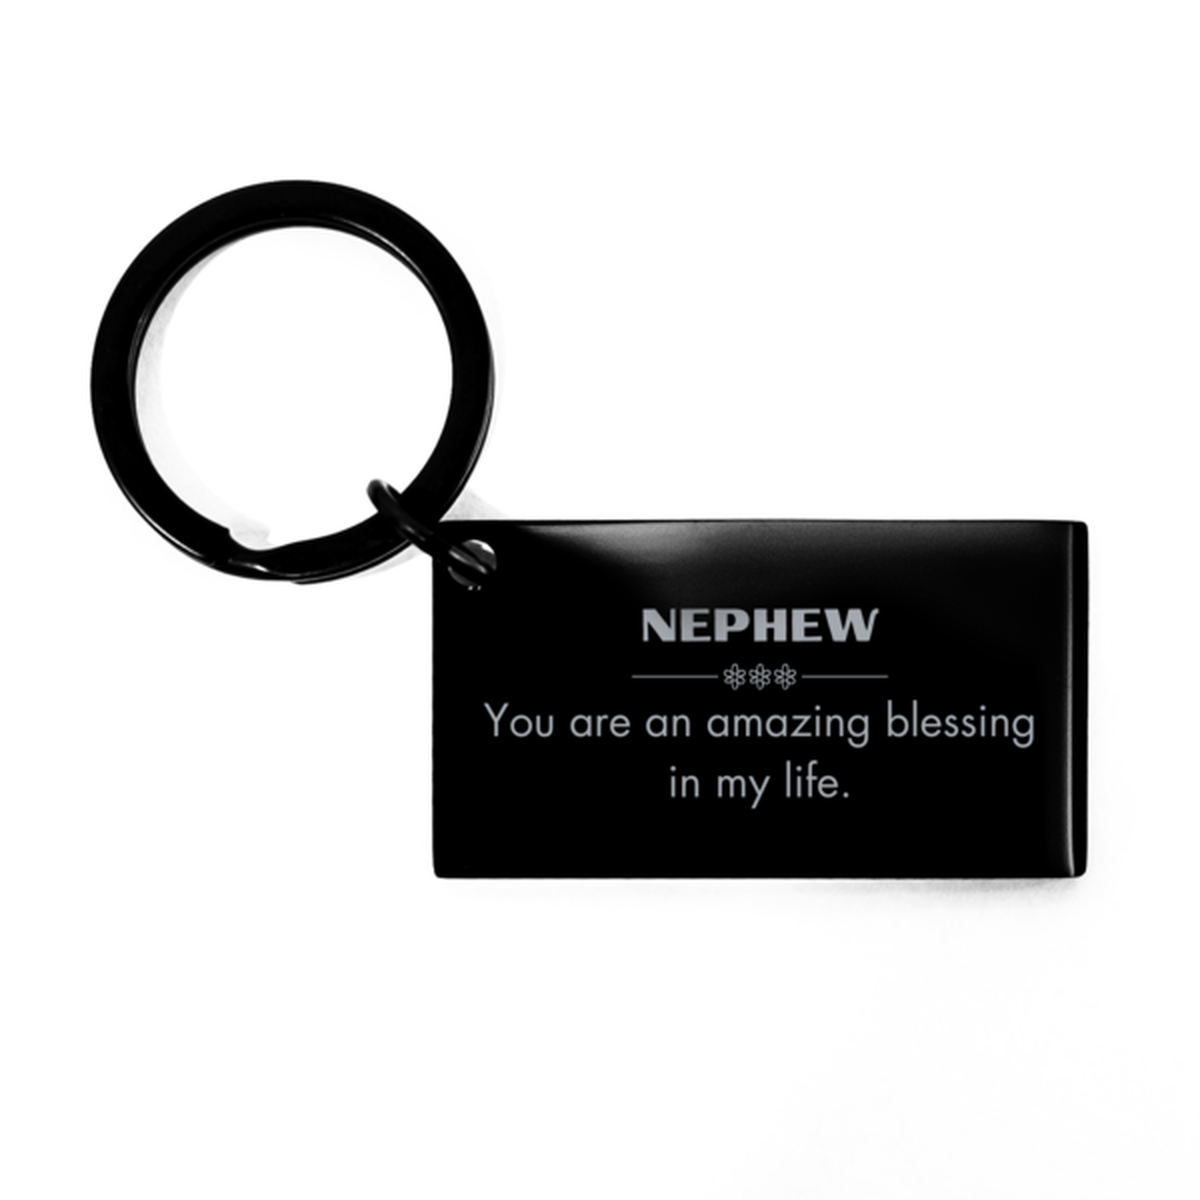 Nephew Keychain, You are an amazing blessing in my life, Thank You Gifts For Nephew, Inspirational Birthday Christmas Unique Gifts For Nephew